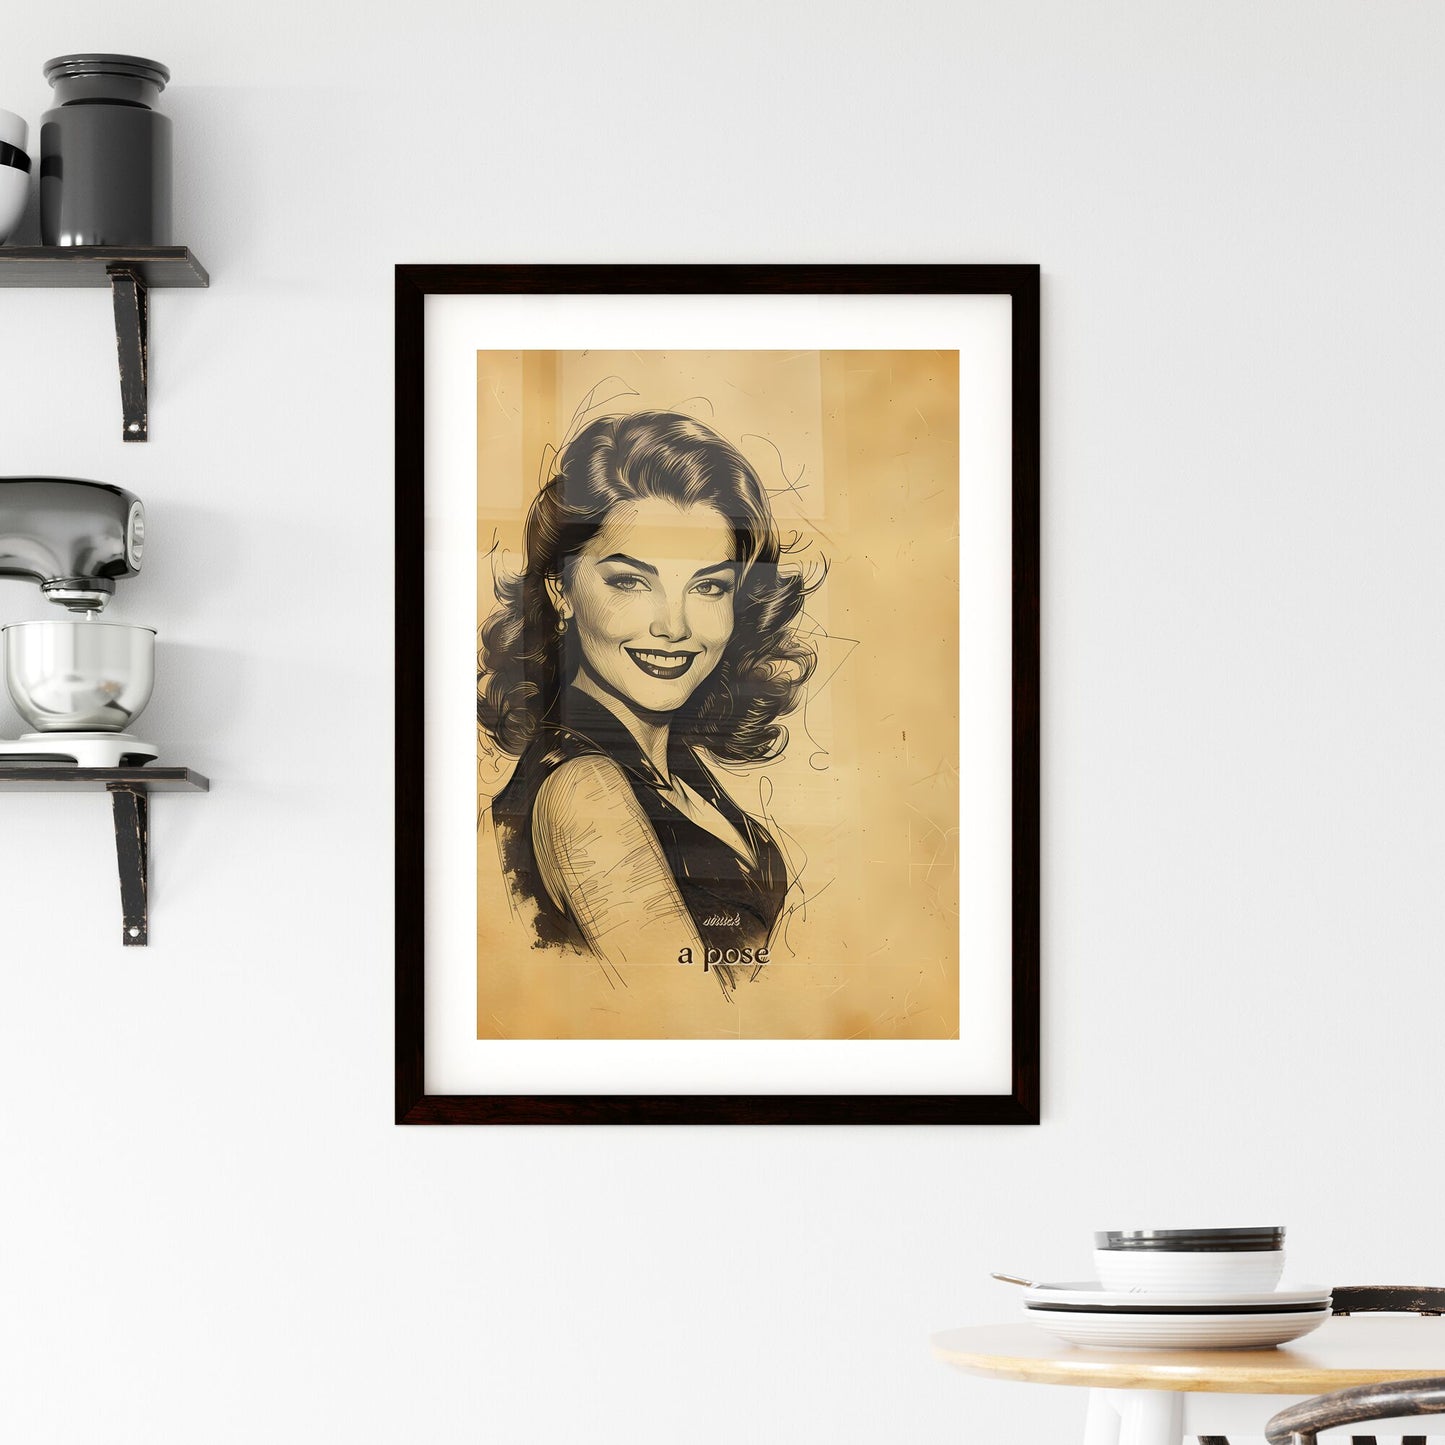 struck, a pose, A Poster of a woman smiling with curly hair Default Title